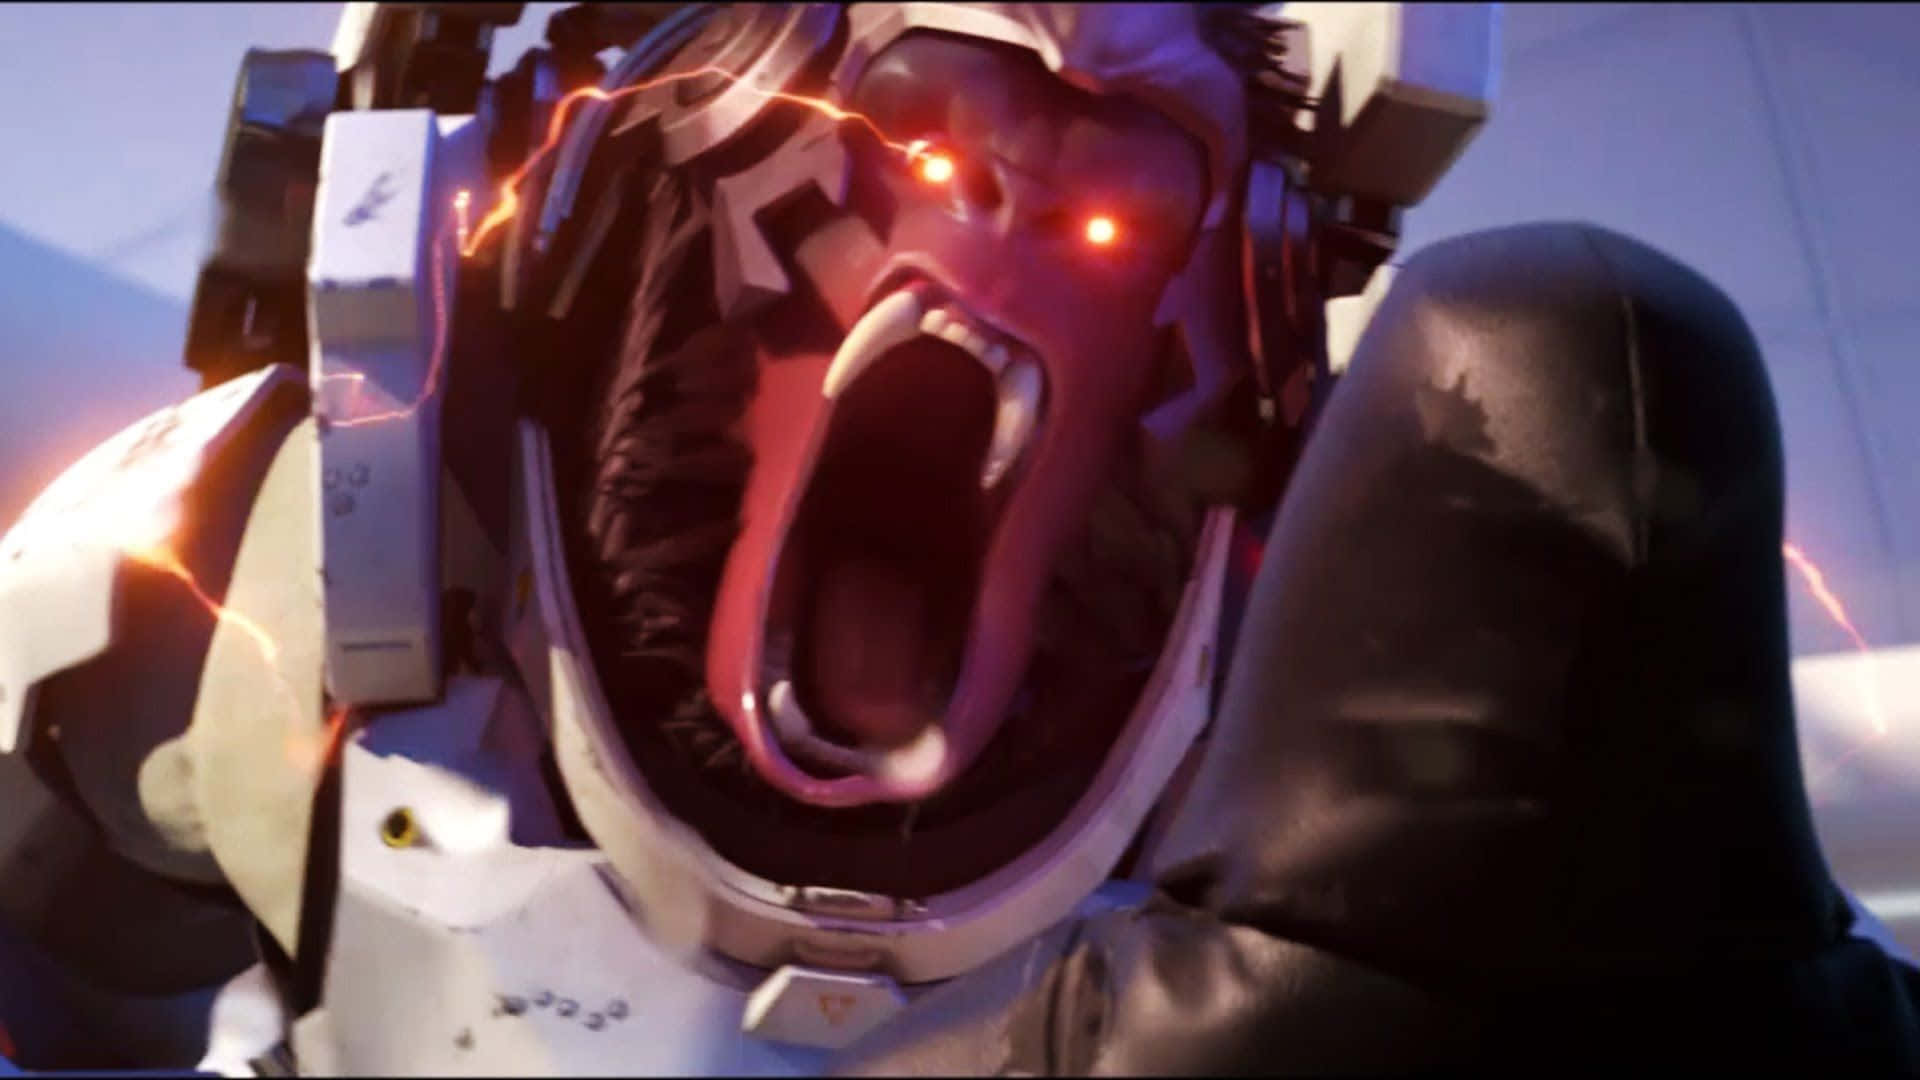 Winston, the Iconic Overwatch Hero, in Action Wallpaper